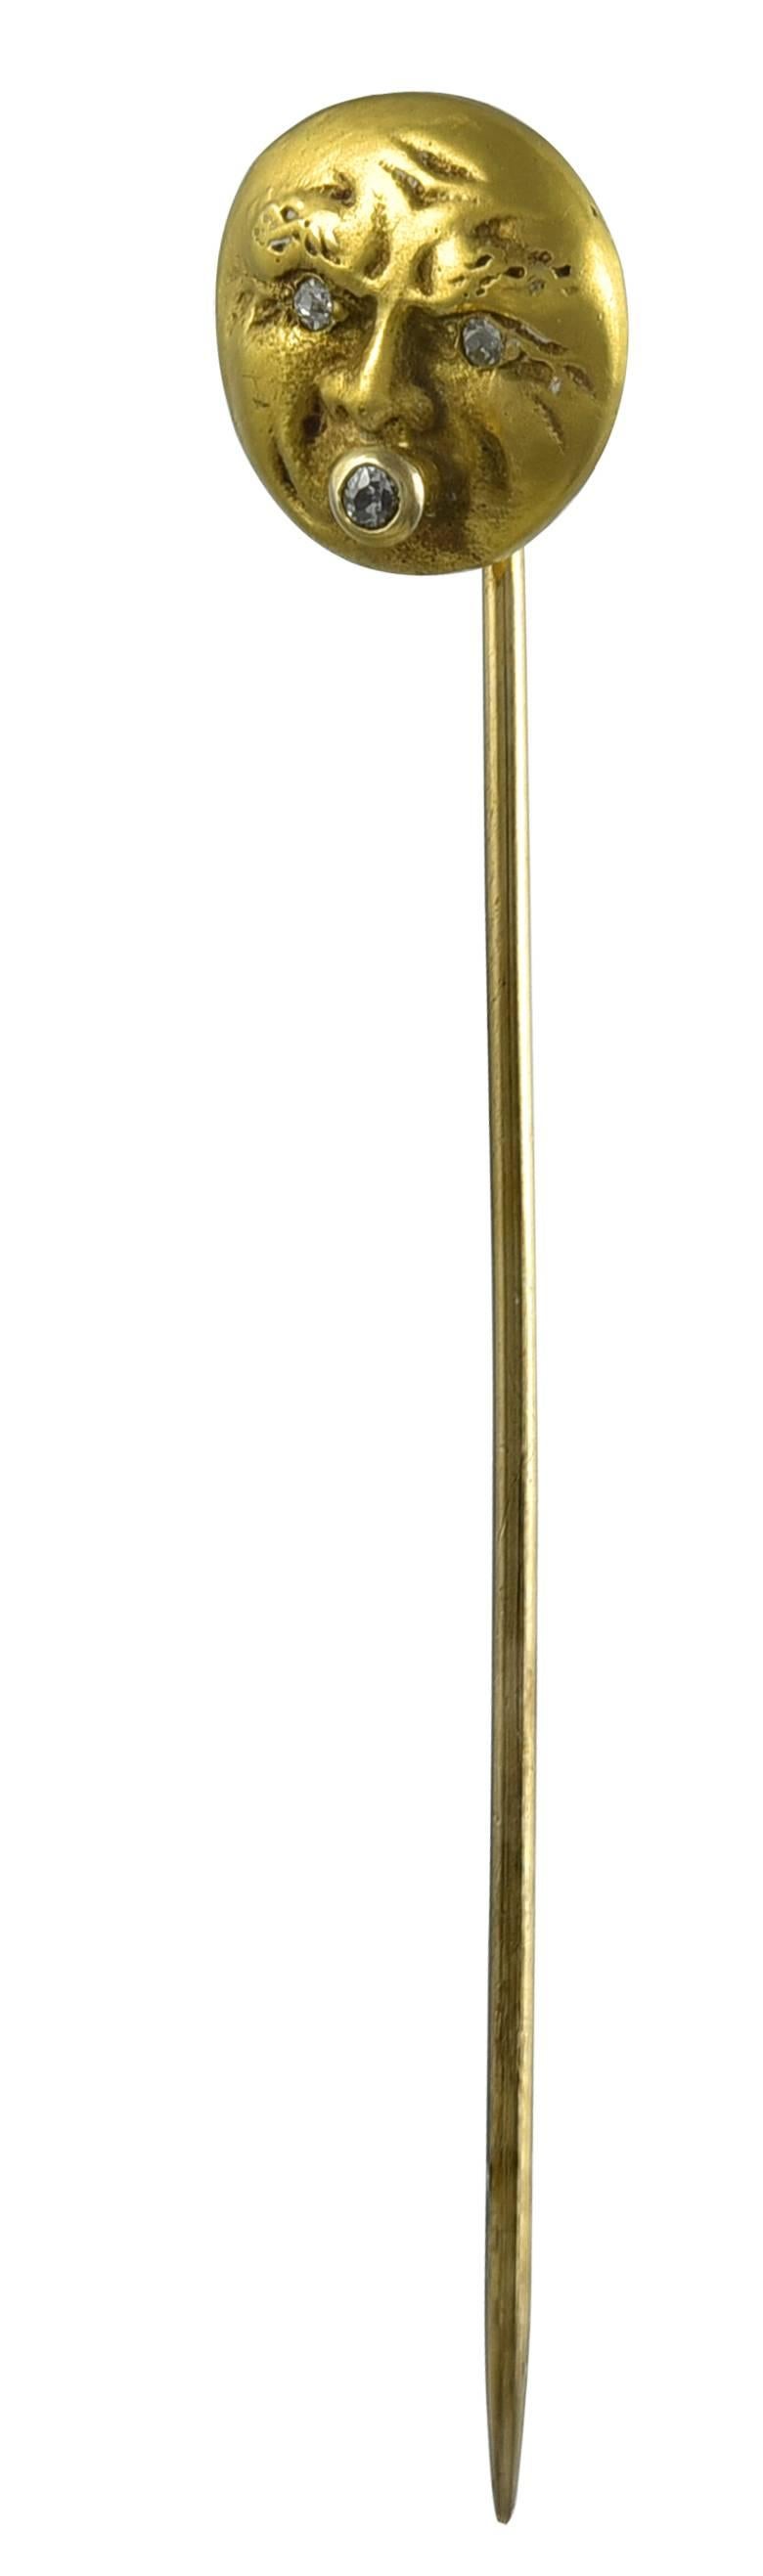 Ultimate for the man in the moon aficionado: a 14K yellow gold stickpin. The man has glittering gold eyes and is smoking a diamond-tipped cigar. A great piece.

Alice Kwartler has sold the finest gold & diamond jewelry and silver for over 40 years.